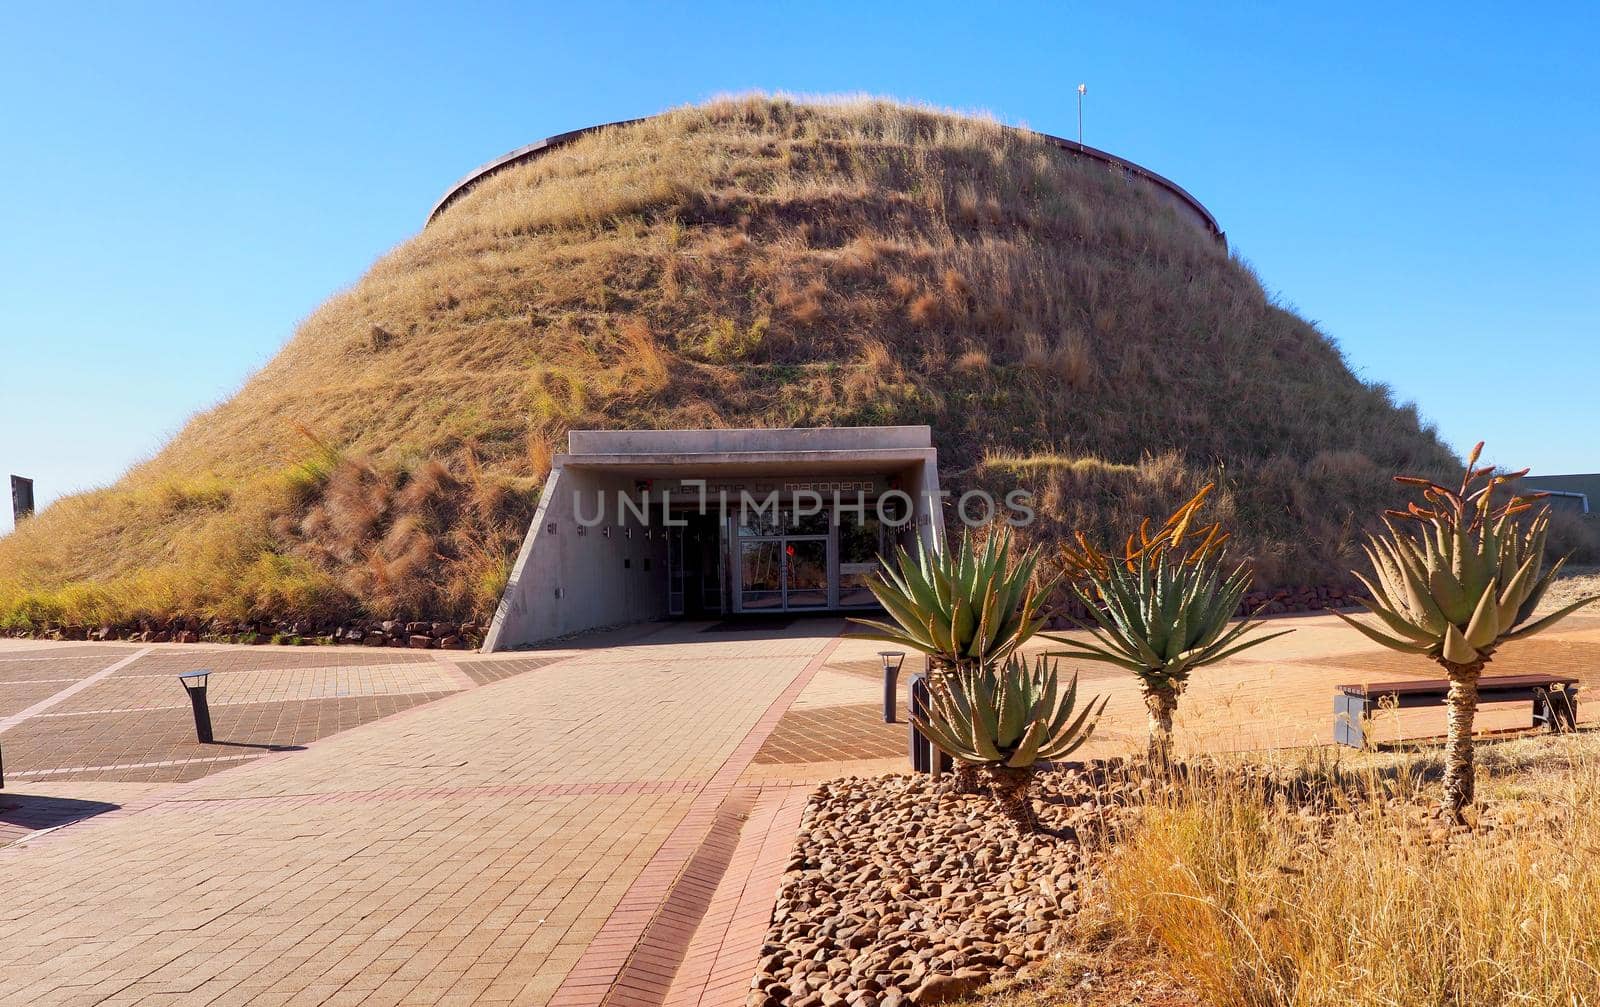 2 July 2019 - Maropeng, Johannesburg, South Africa : The Maropeng Exhibition Centre at the Cradle of Humankind, Johannesburg, South Africa by fivepointsix